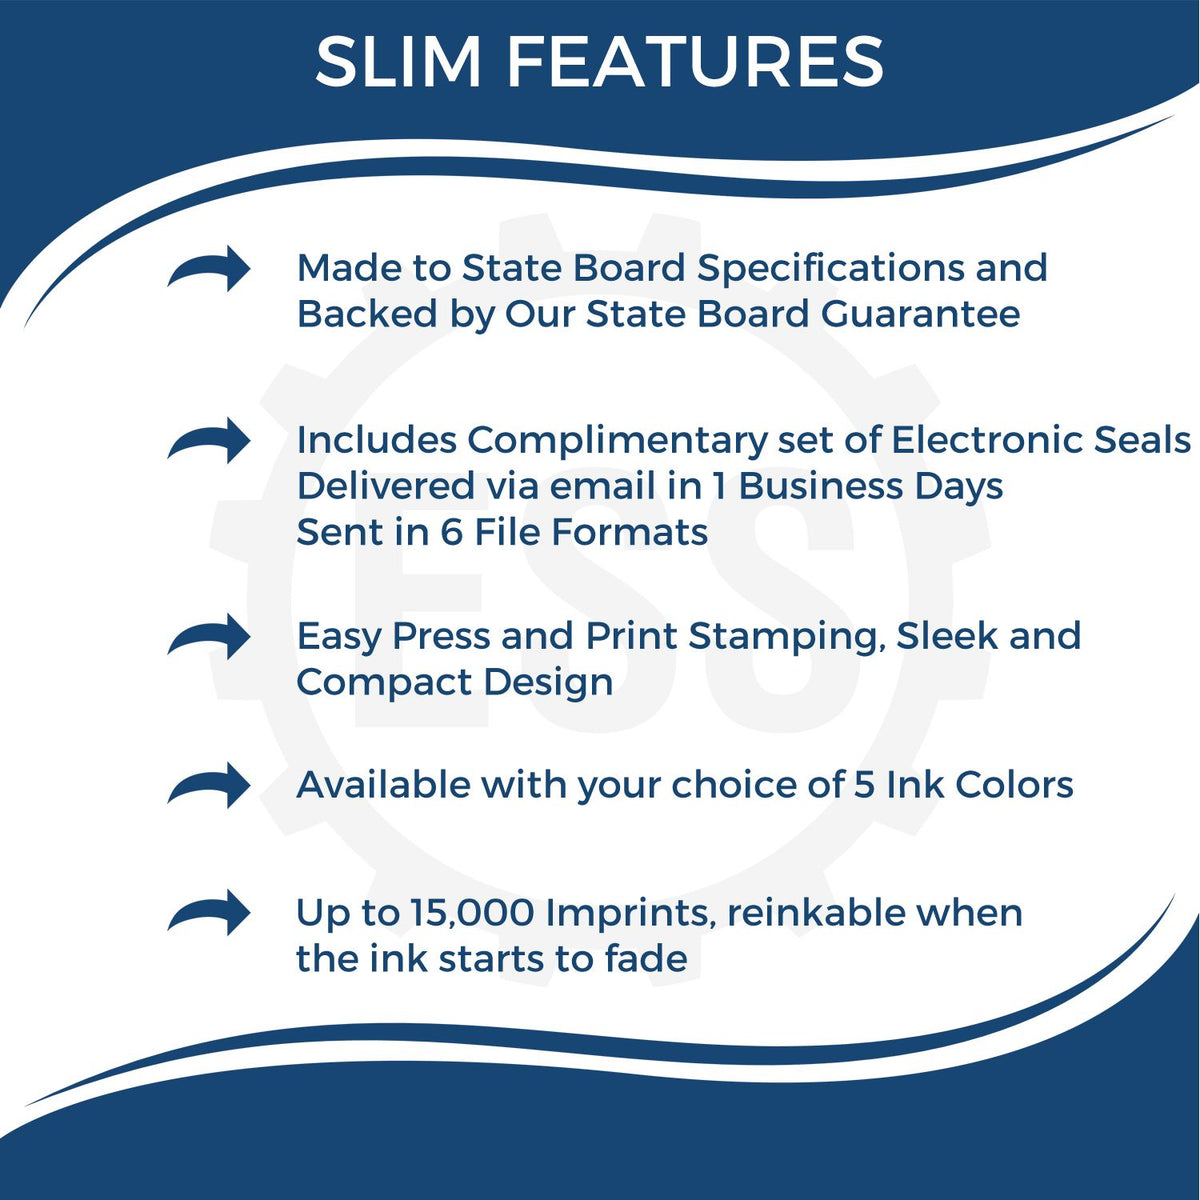 A picture of an infographic highlighting the selling points for the Super Slim New York Notary Public Stamp